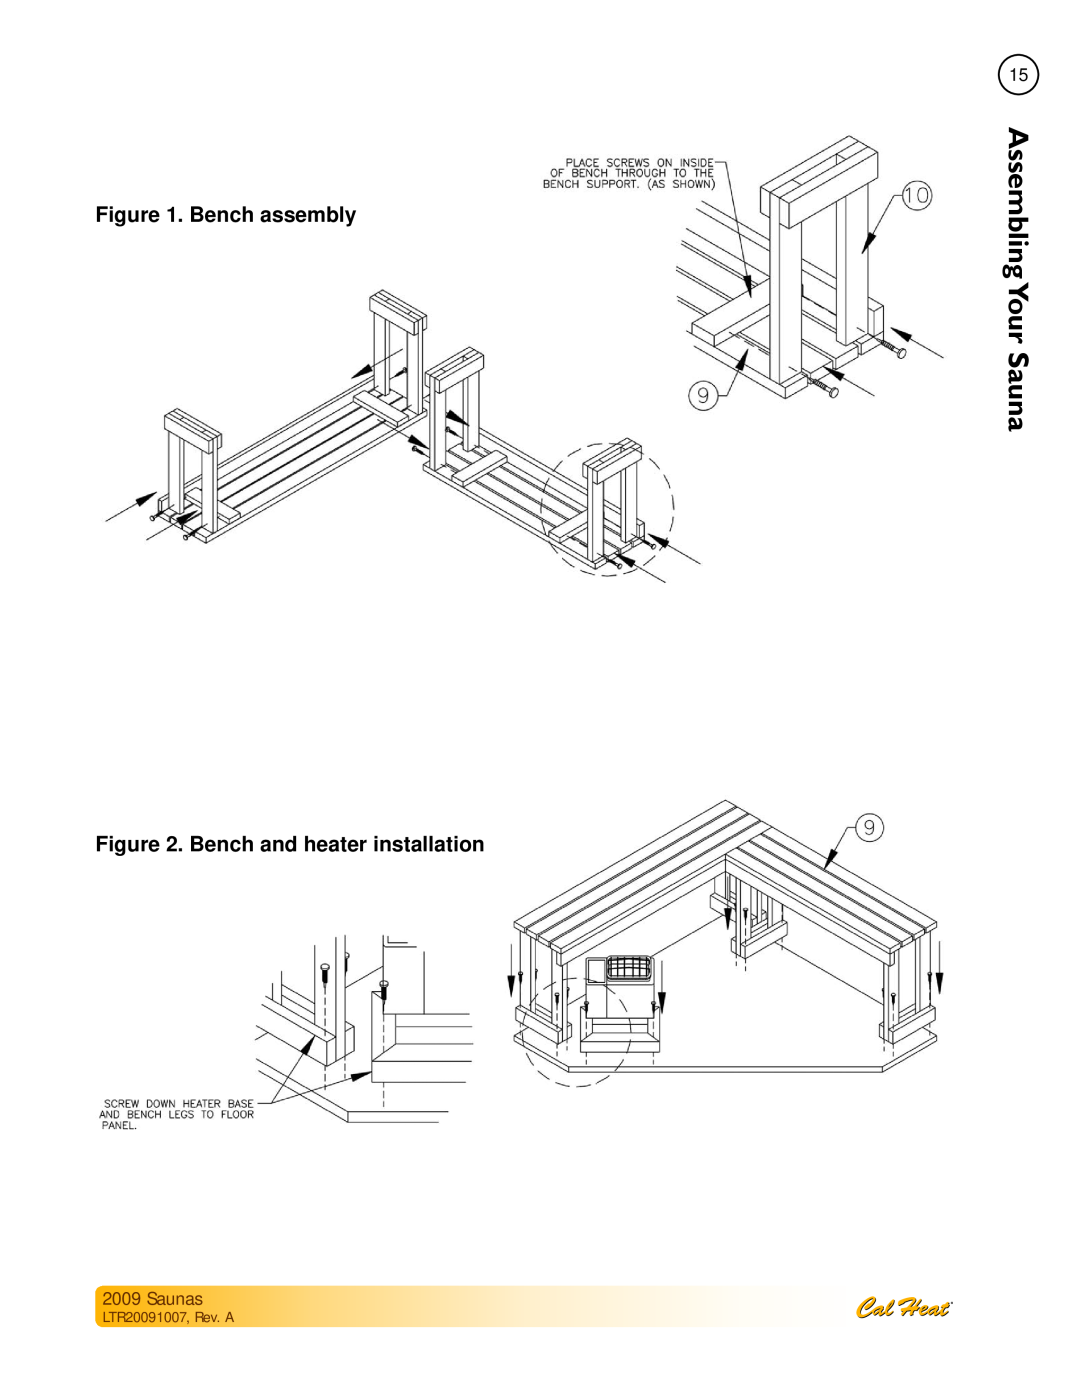 Cal Spas Saunas manual Bench assembly, Bench and heater installation, LTR20091007, Rev. A, AssemblingYour 